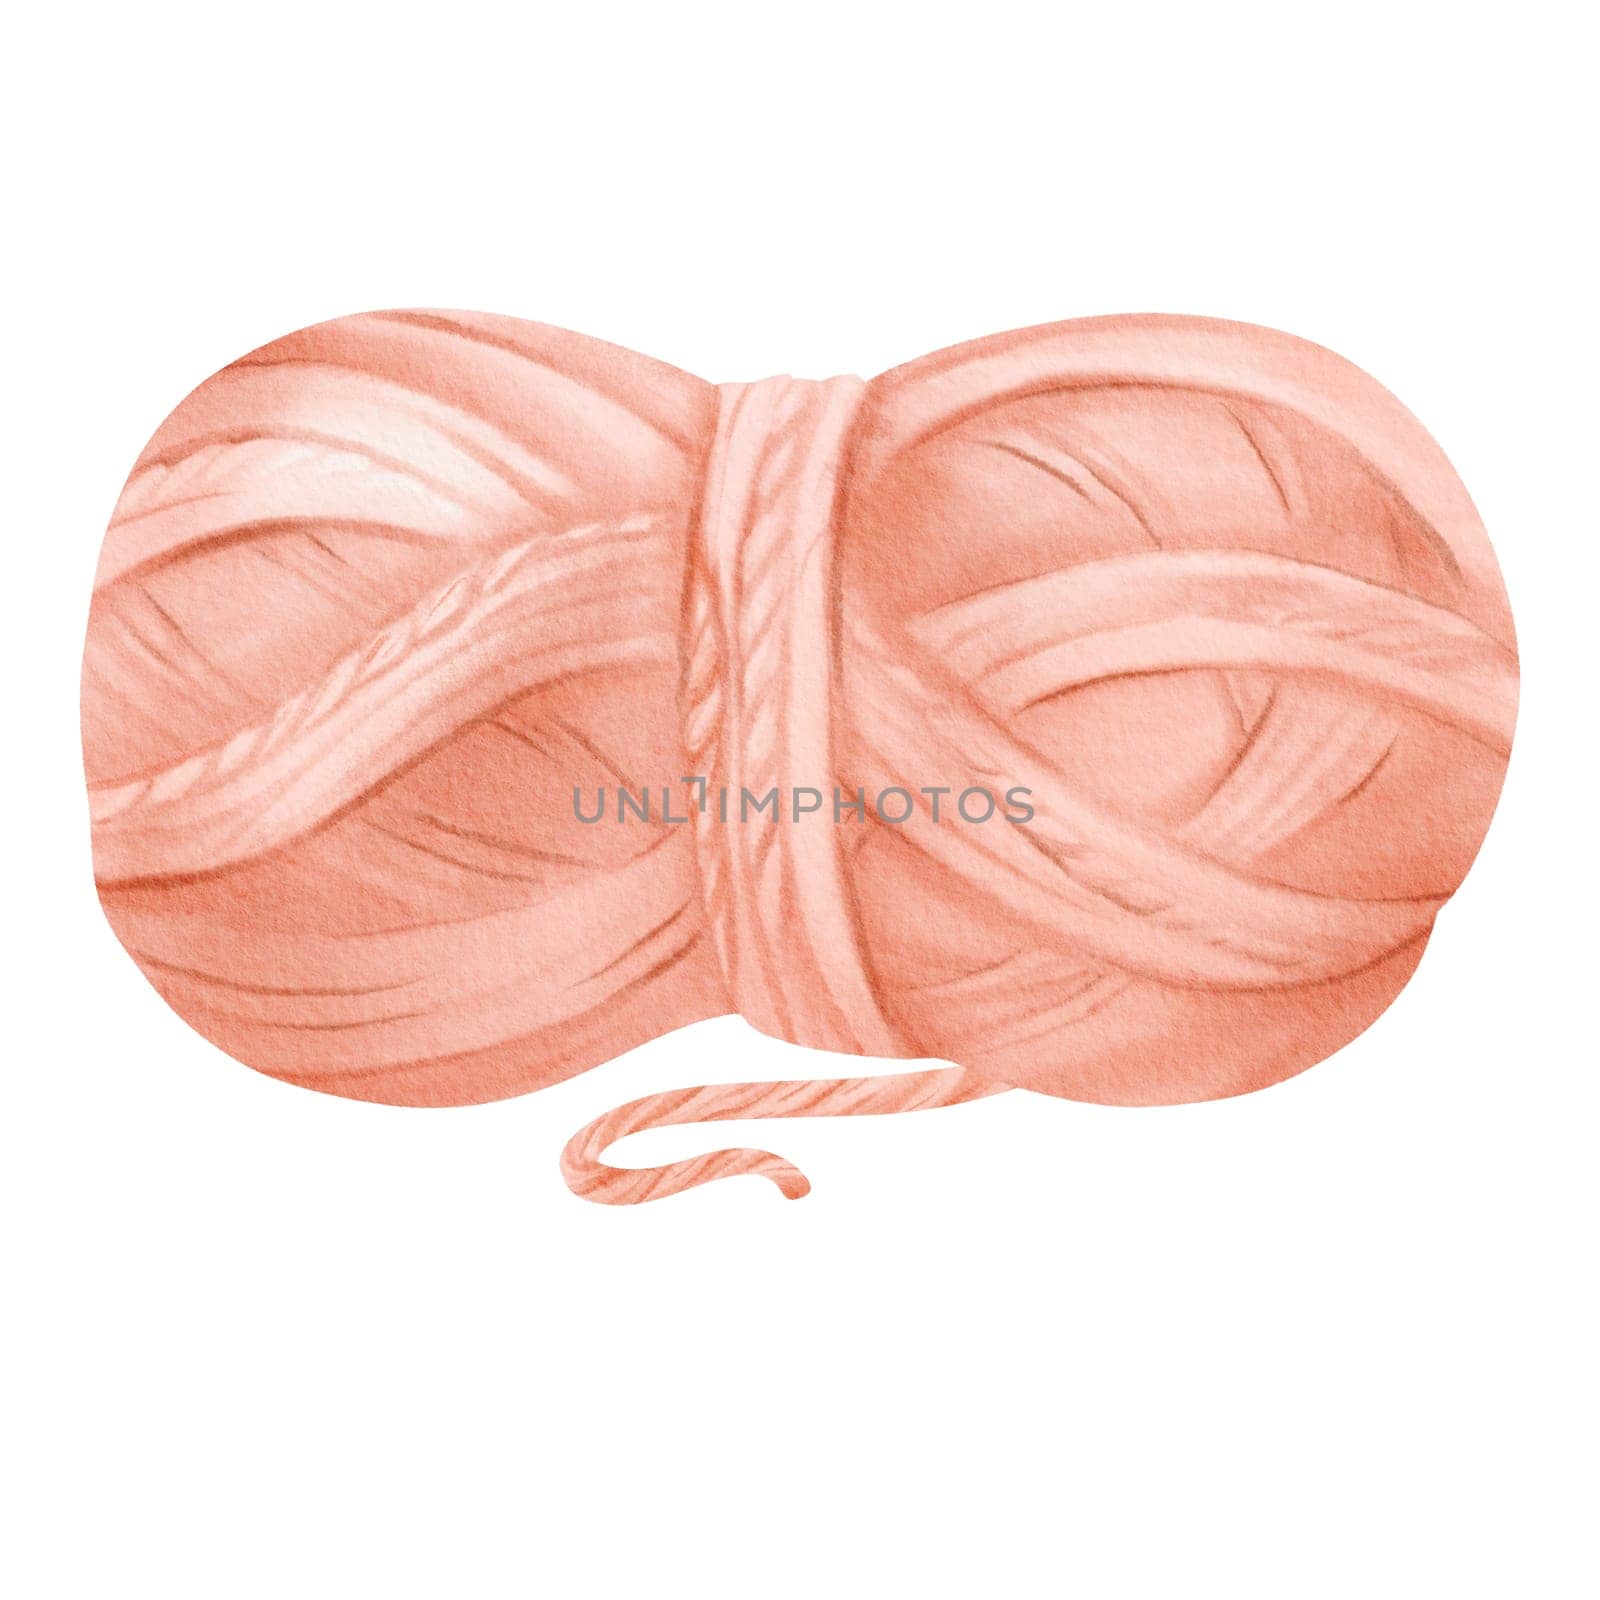 A watercolor illustration of a pink thread spool. Made of wool and cotton fibers. for crafting enthusiasts, sewing shops, textile manufacturers, educational materials for sewing and knitting classes.